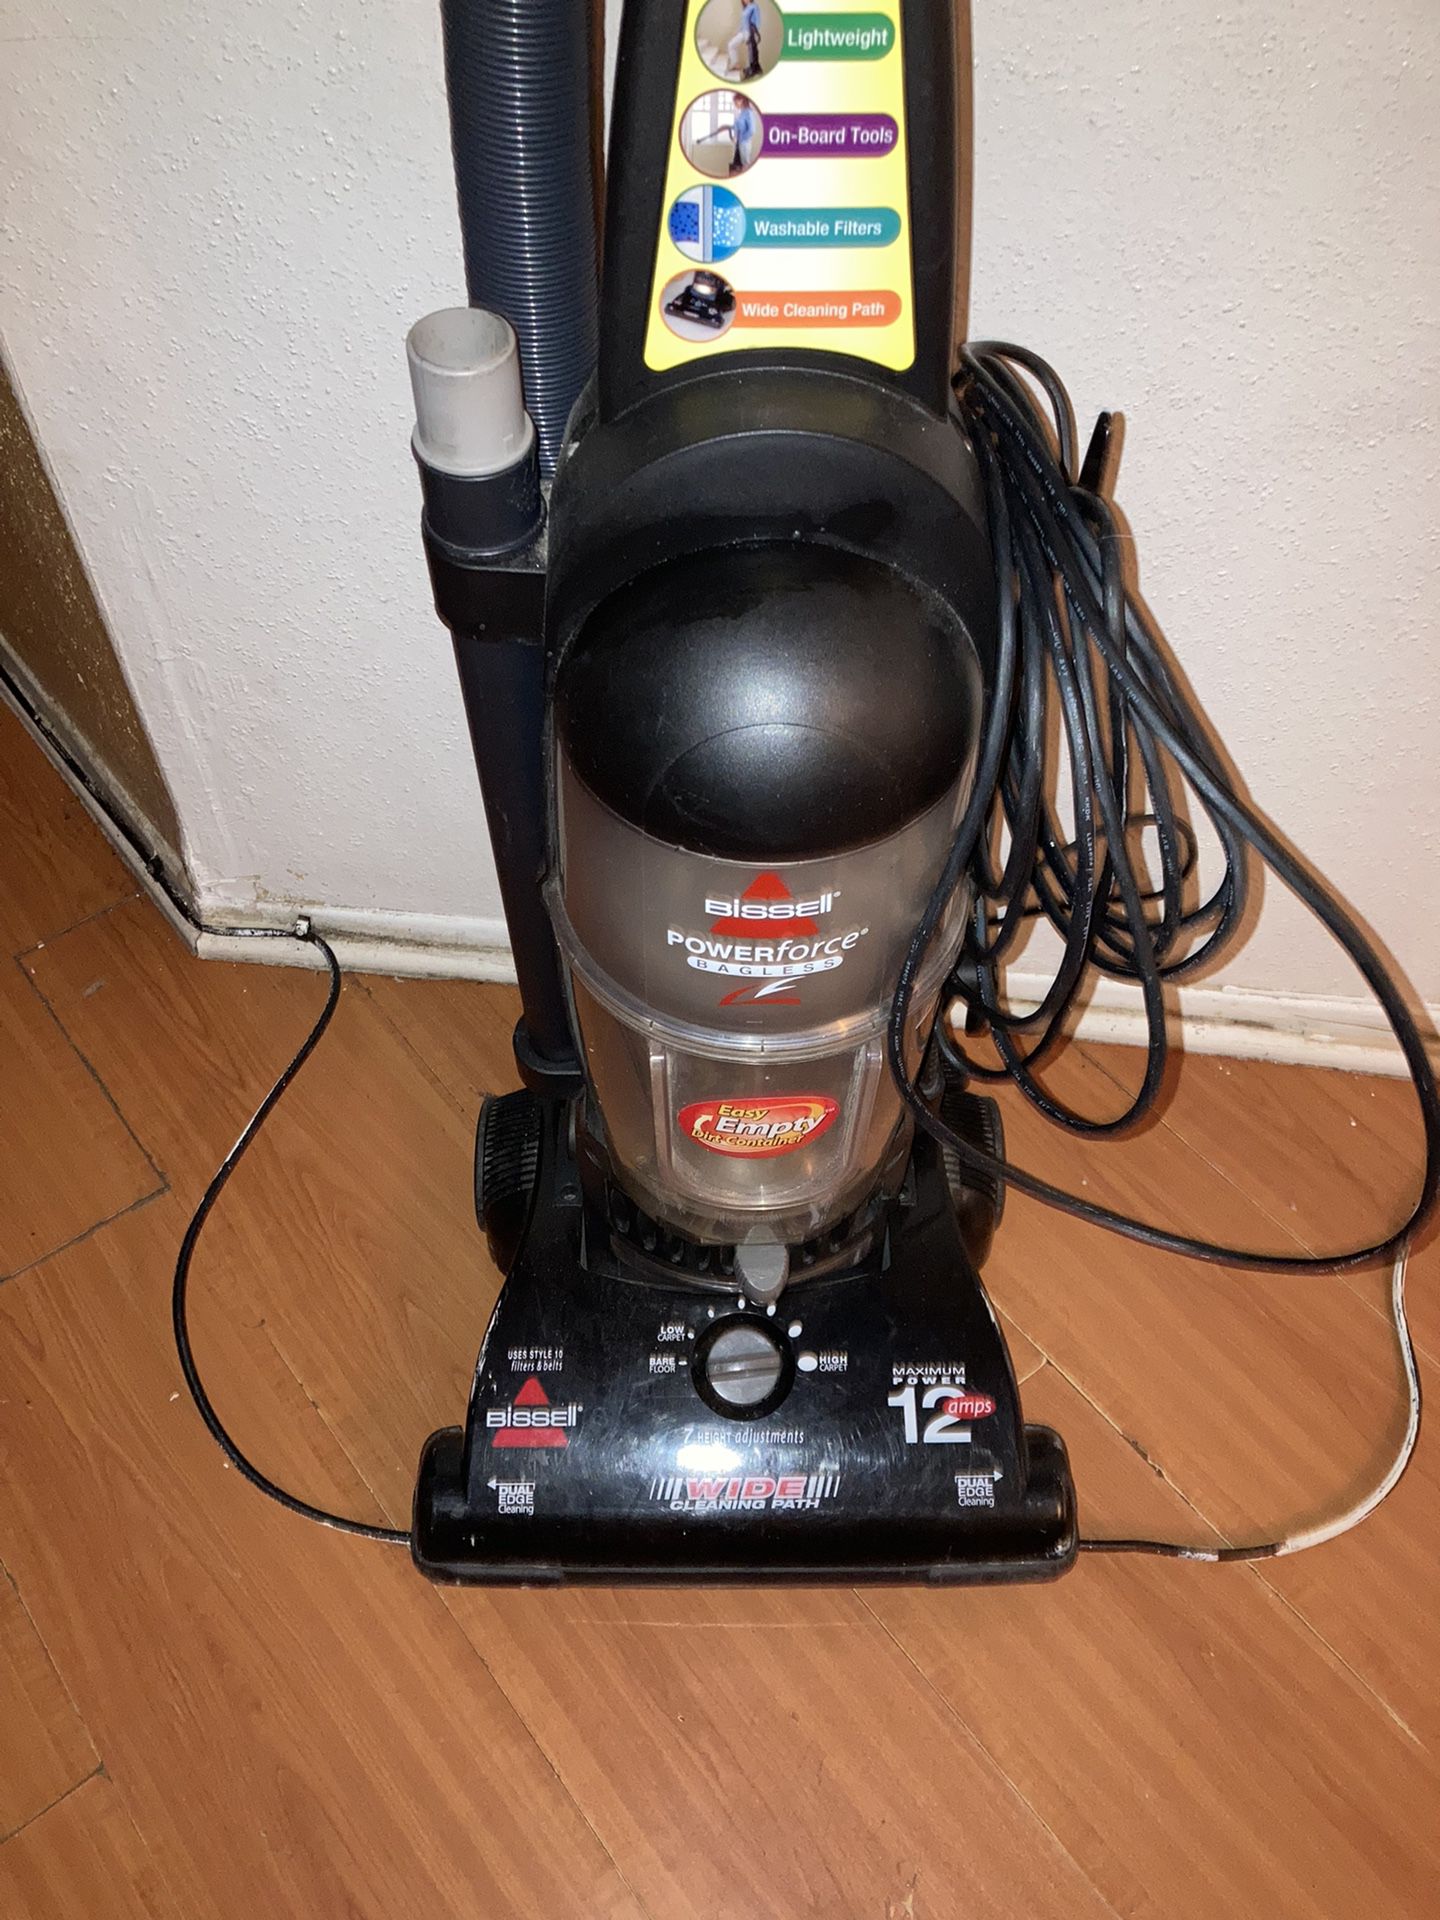 Vacuum Cleaner Makes Long Noise That Works